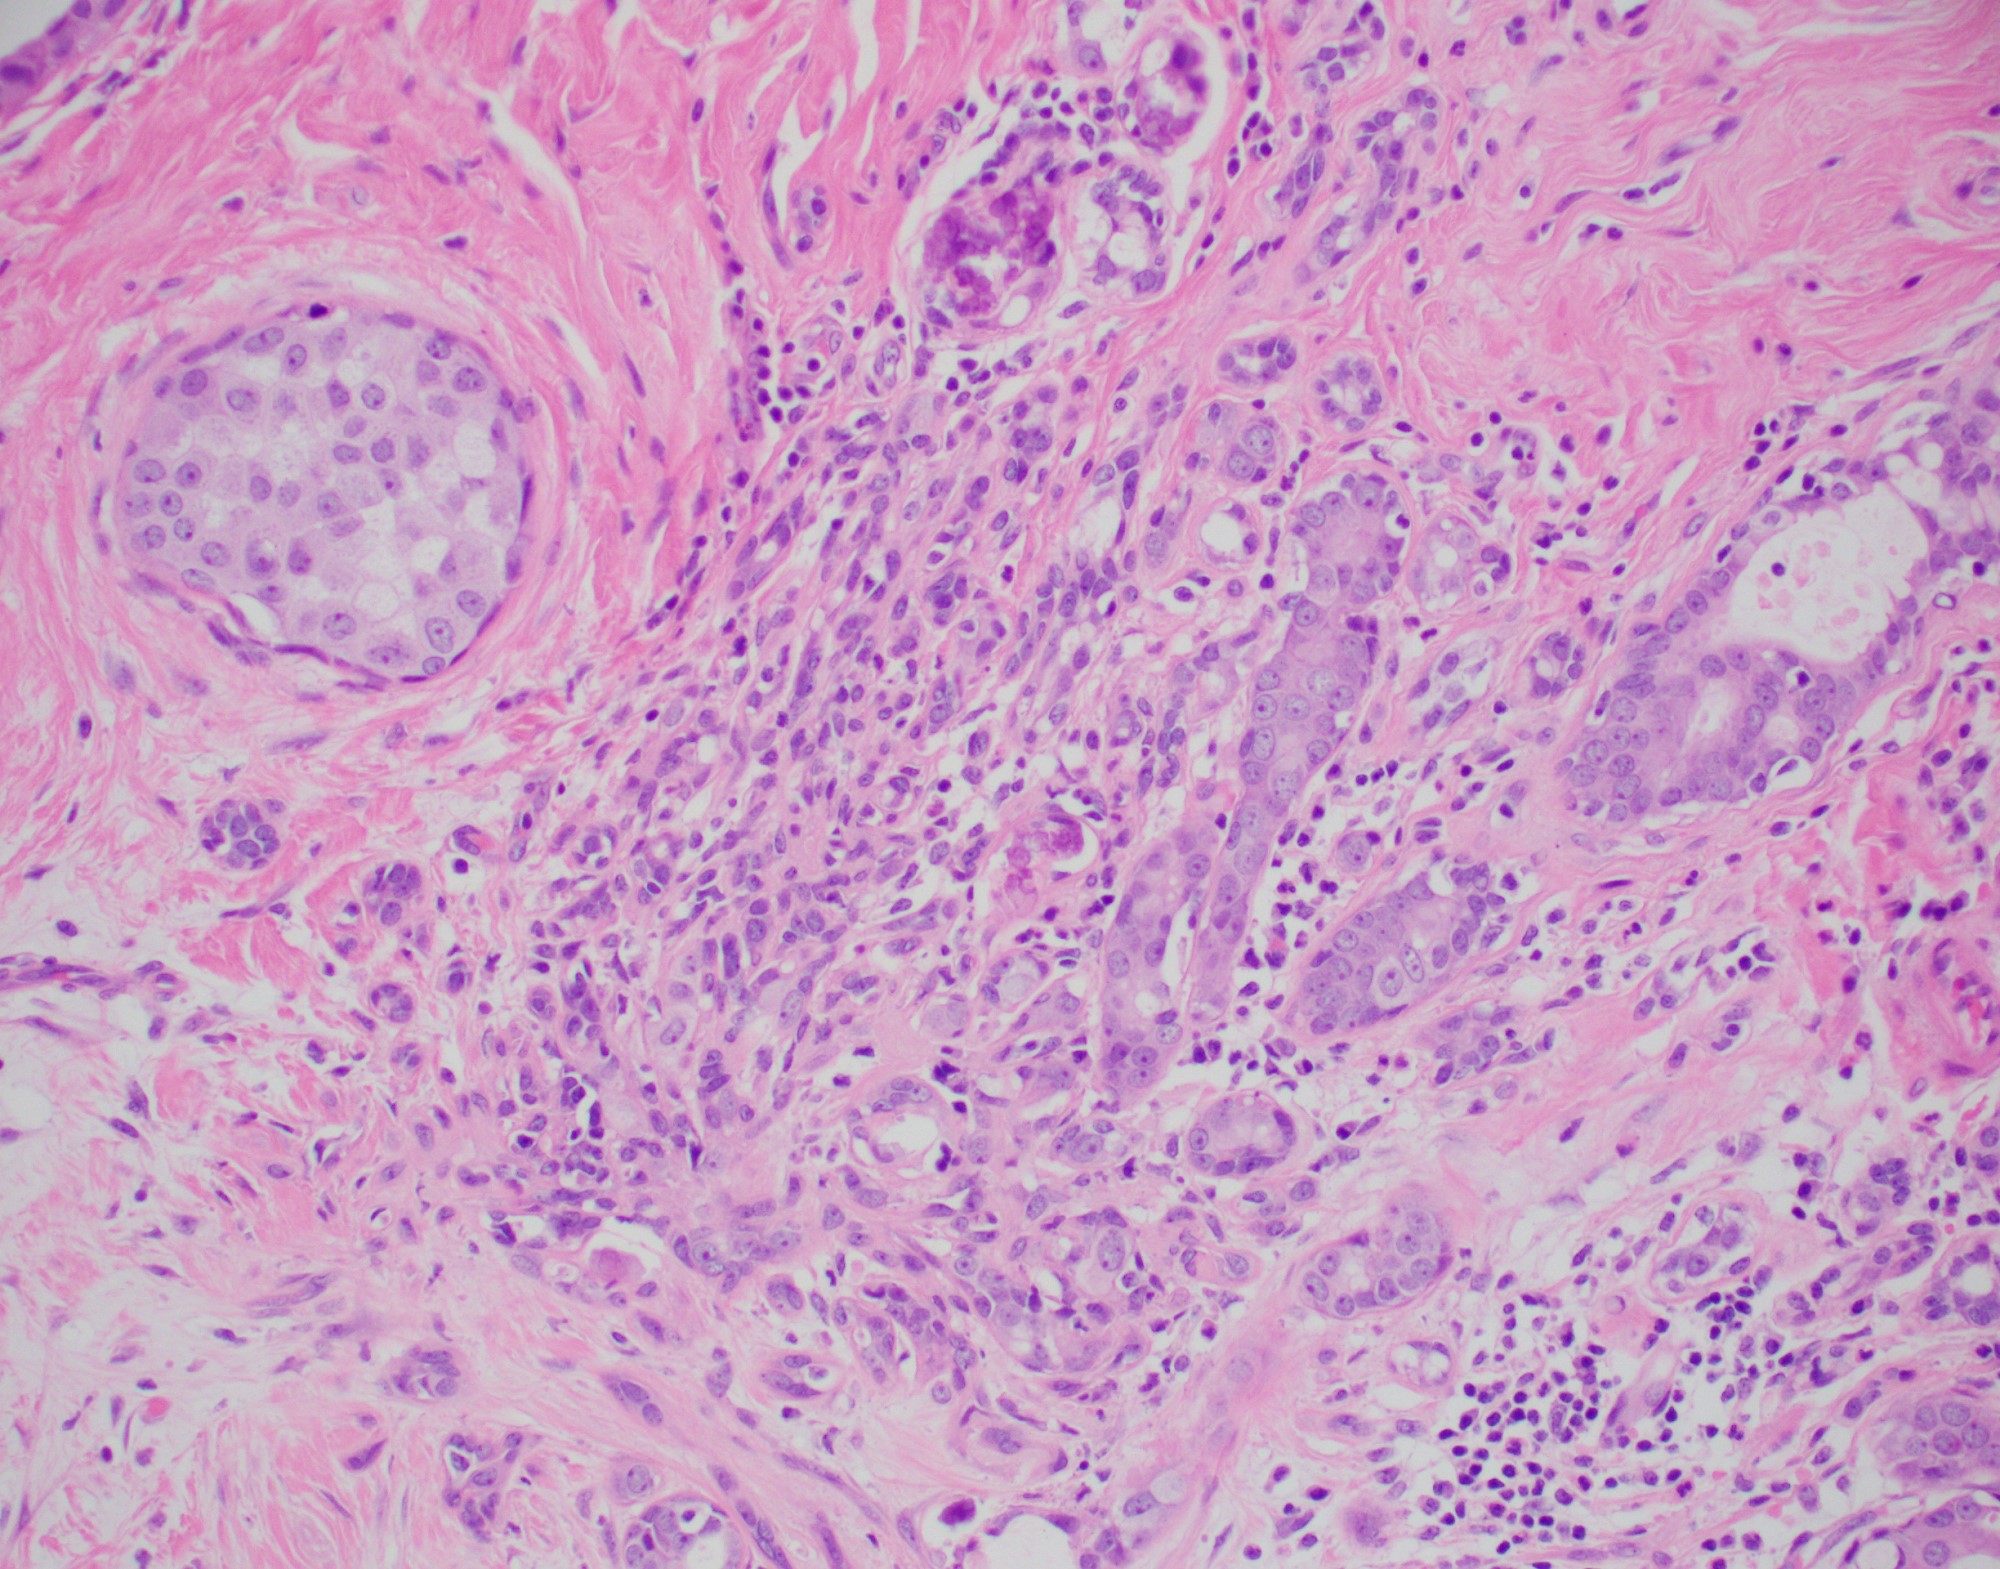 Sclerosing adenosis with DCIS